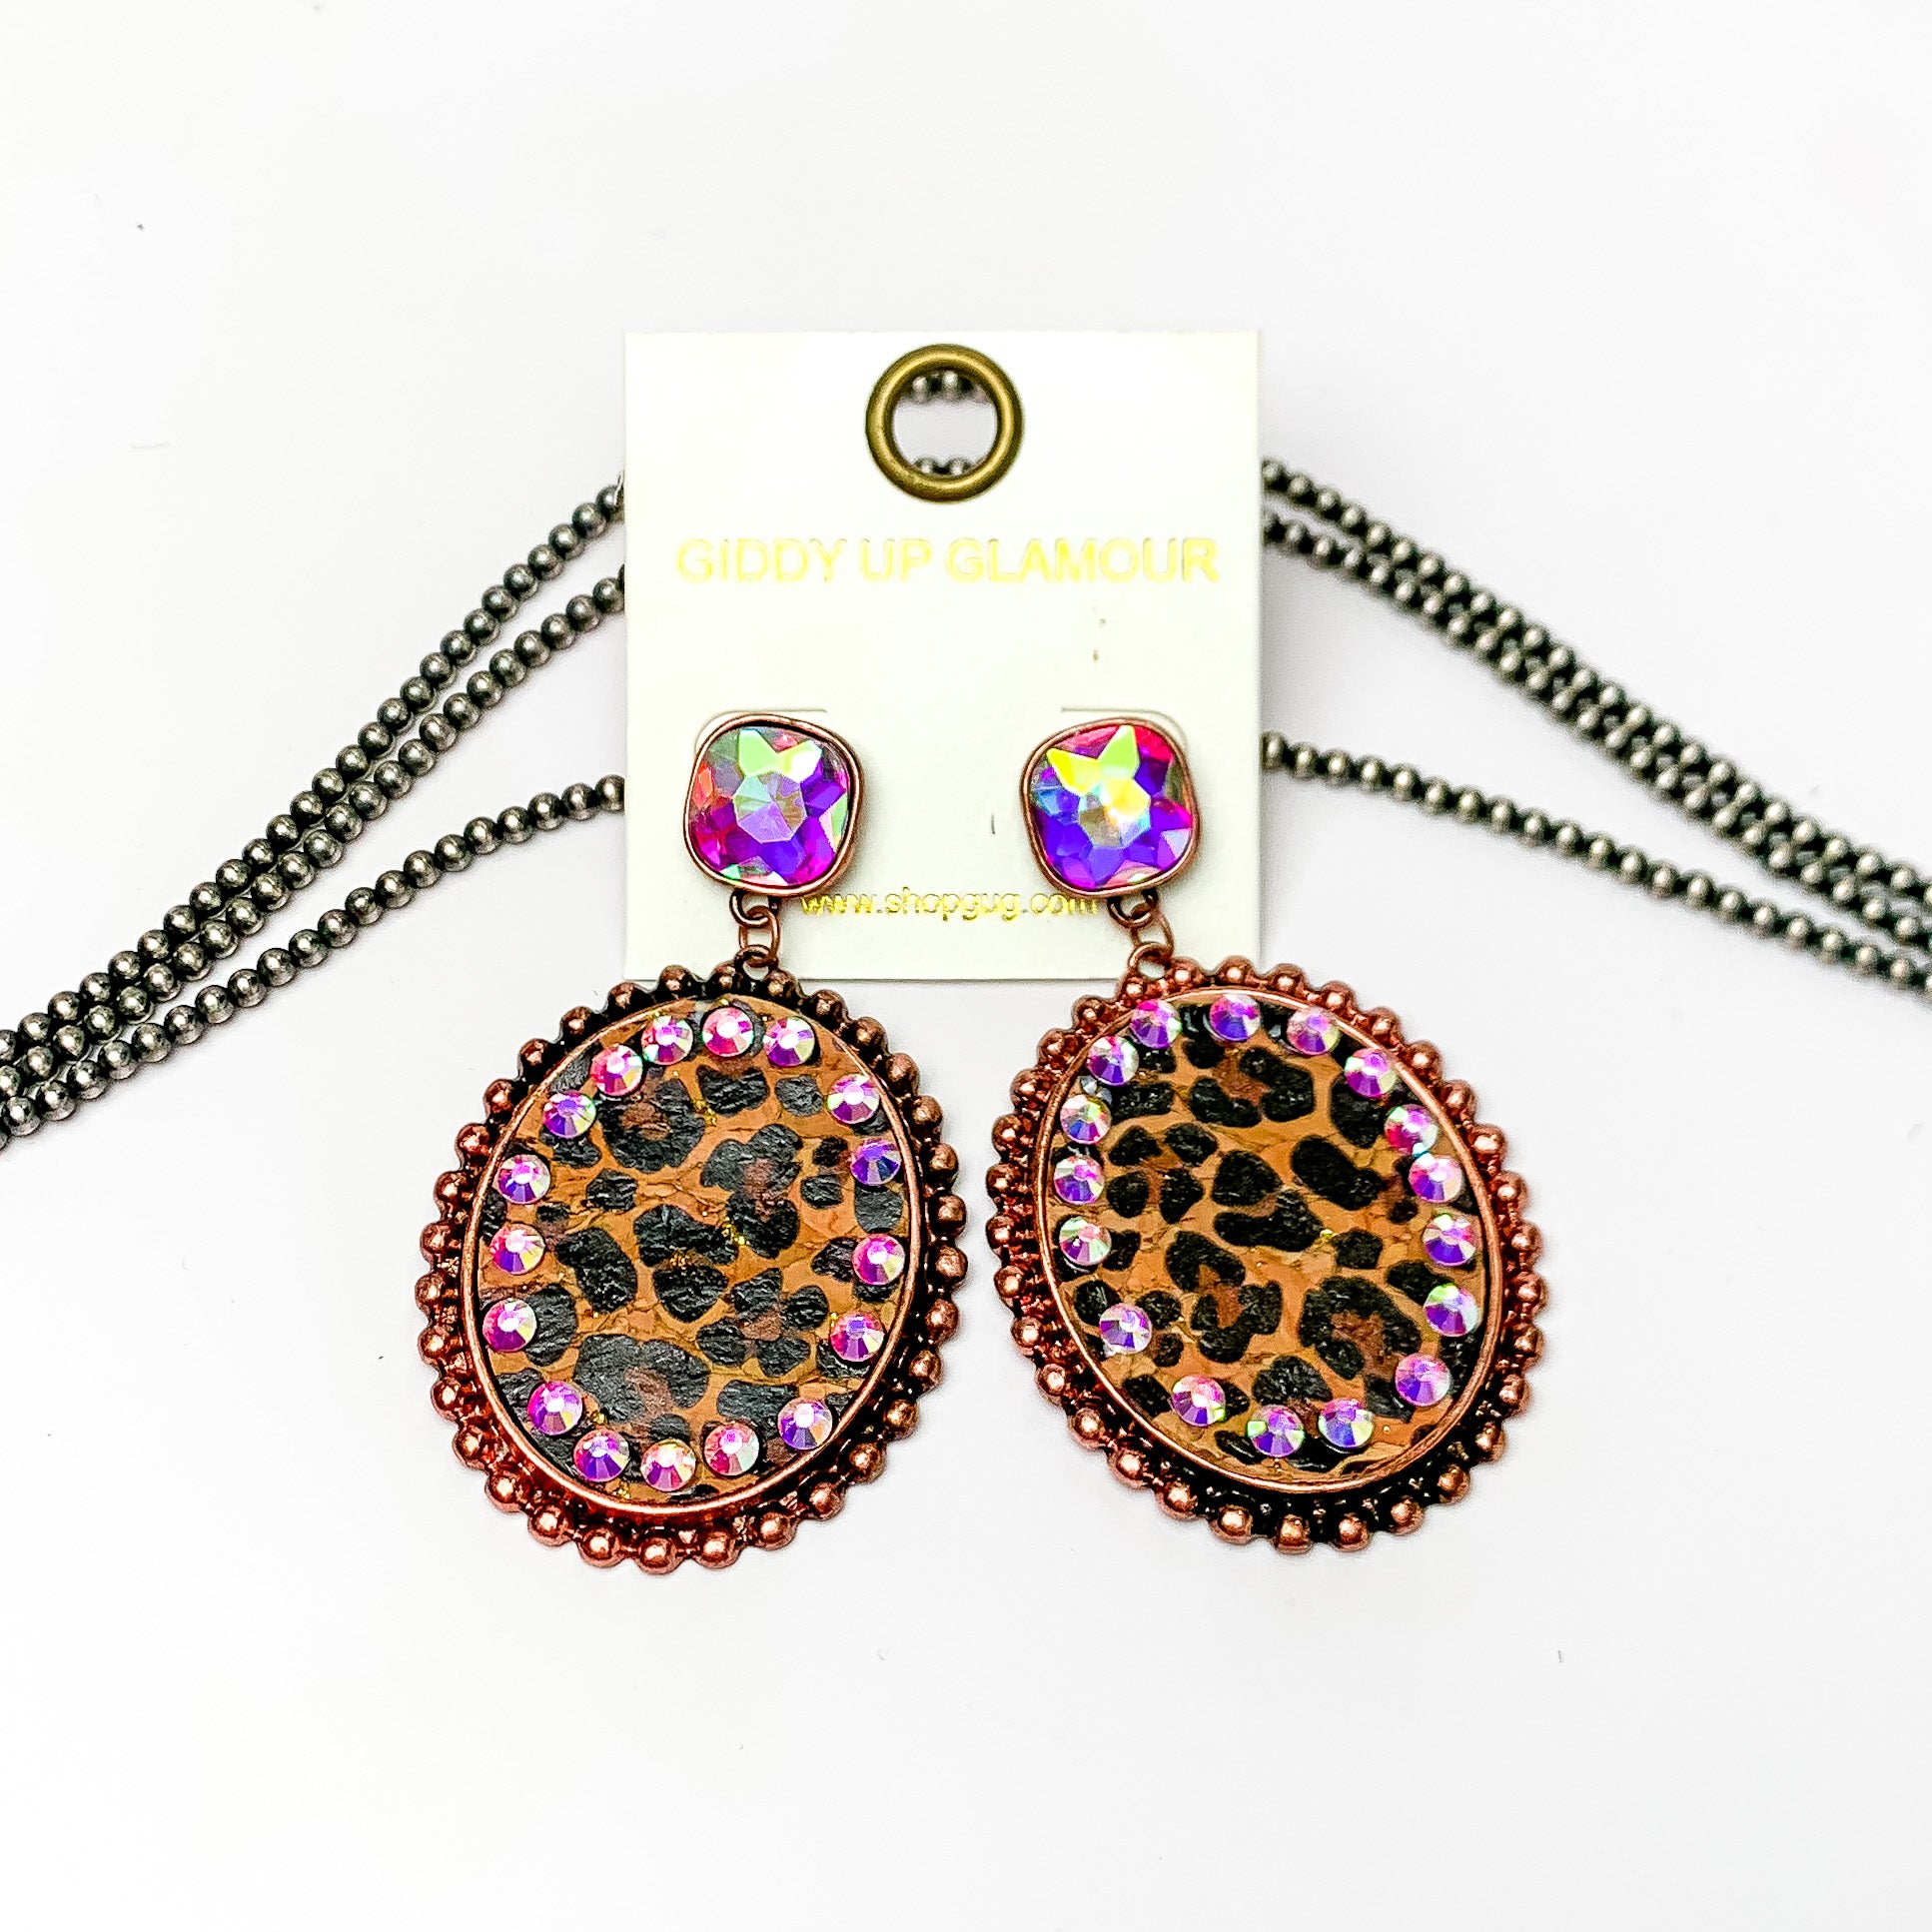 These earrings are oval shaped with leopard print inlay with the outline of the earing is copper but also has ab crystal going around the oval shape. These pair of earrings also have a ab crystal post style earring. Pictured on a white background with navajo pearls behind it.